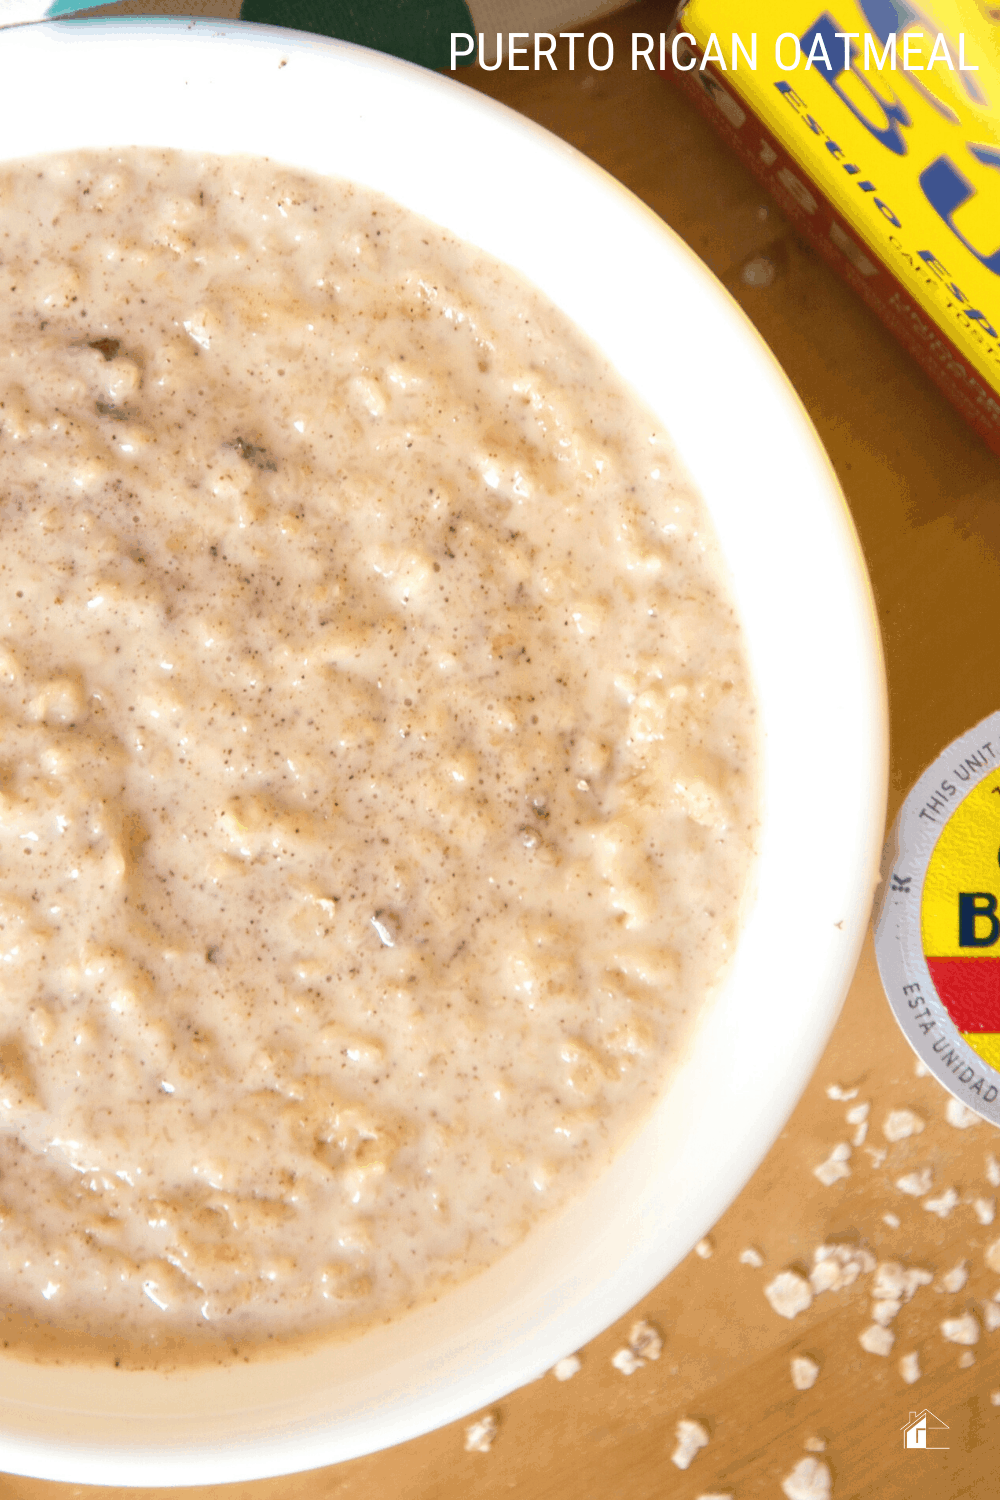 Nothing keeps me going in the mornings than a delicious Puerto Rican breakfast and Café Bustelo. Learn how to make Puerto Rican Oatmeal when you click here! #PuertoRicanFood #PuertoRicanRecipes via @mystayathome